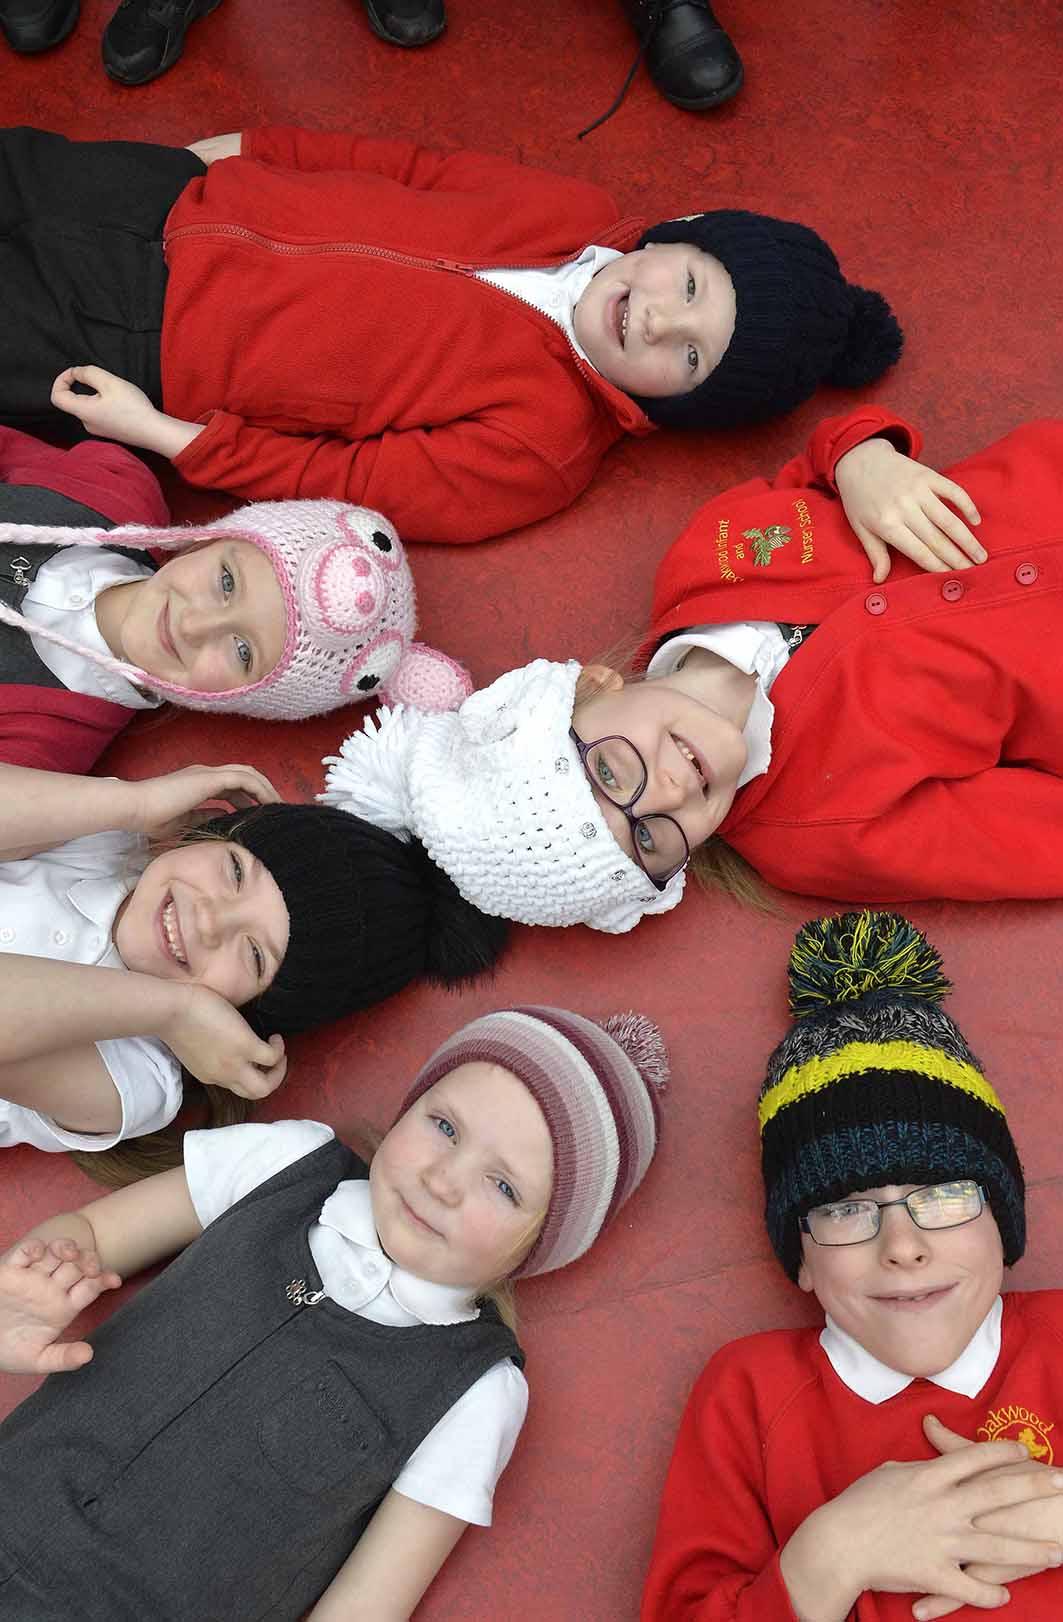 Wooly Hats Day at Oakwood Sch